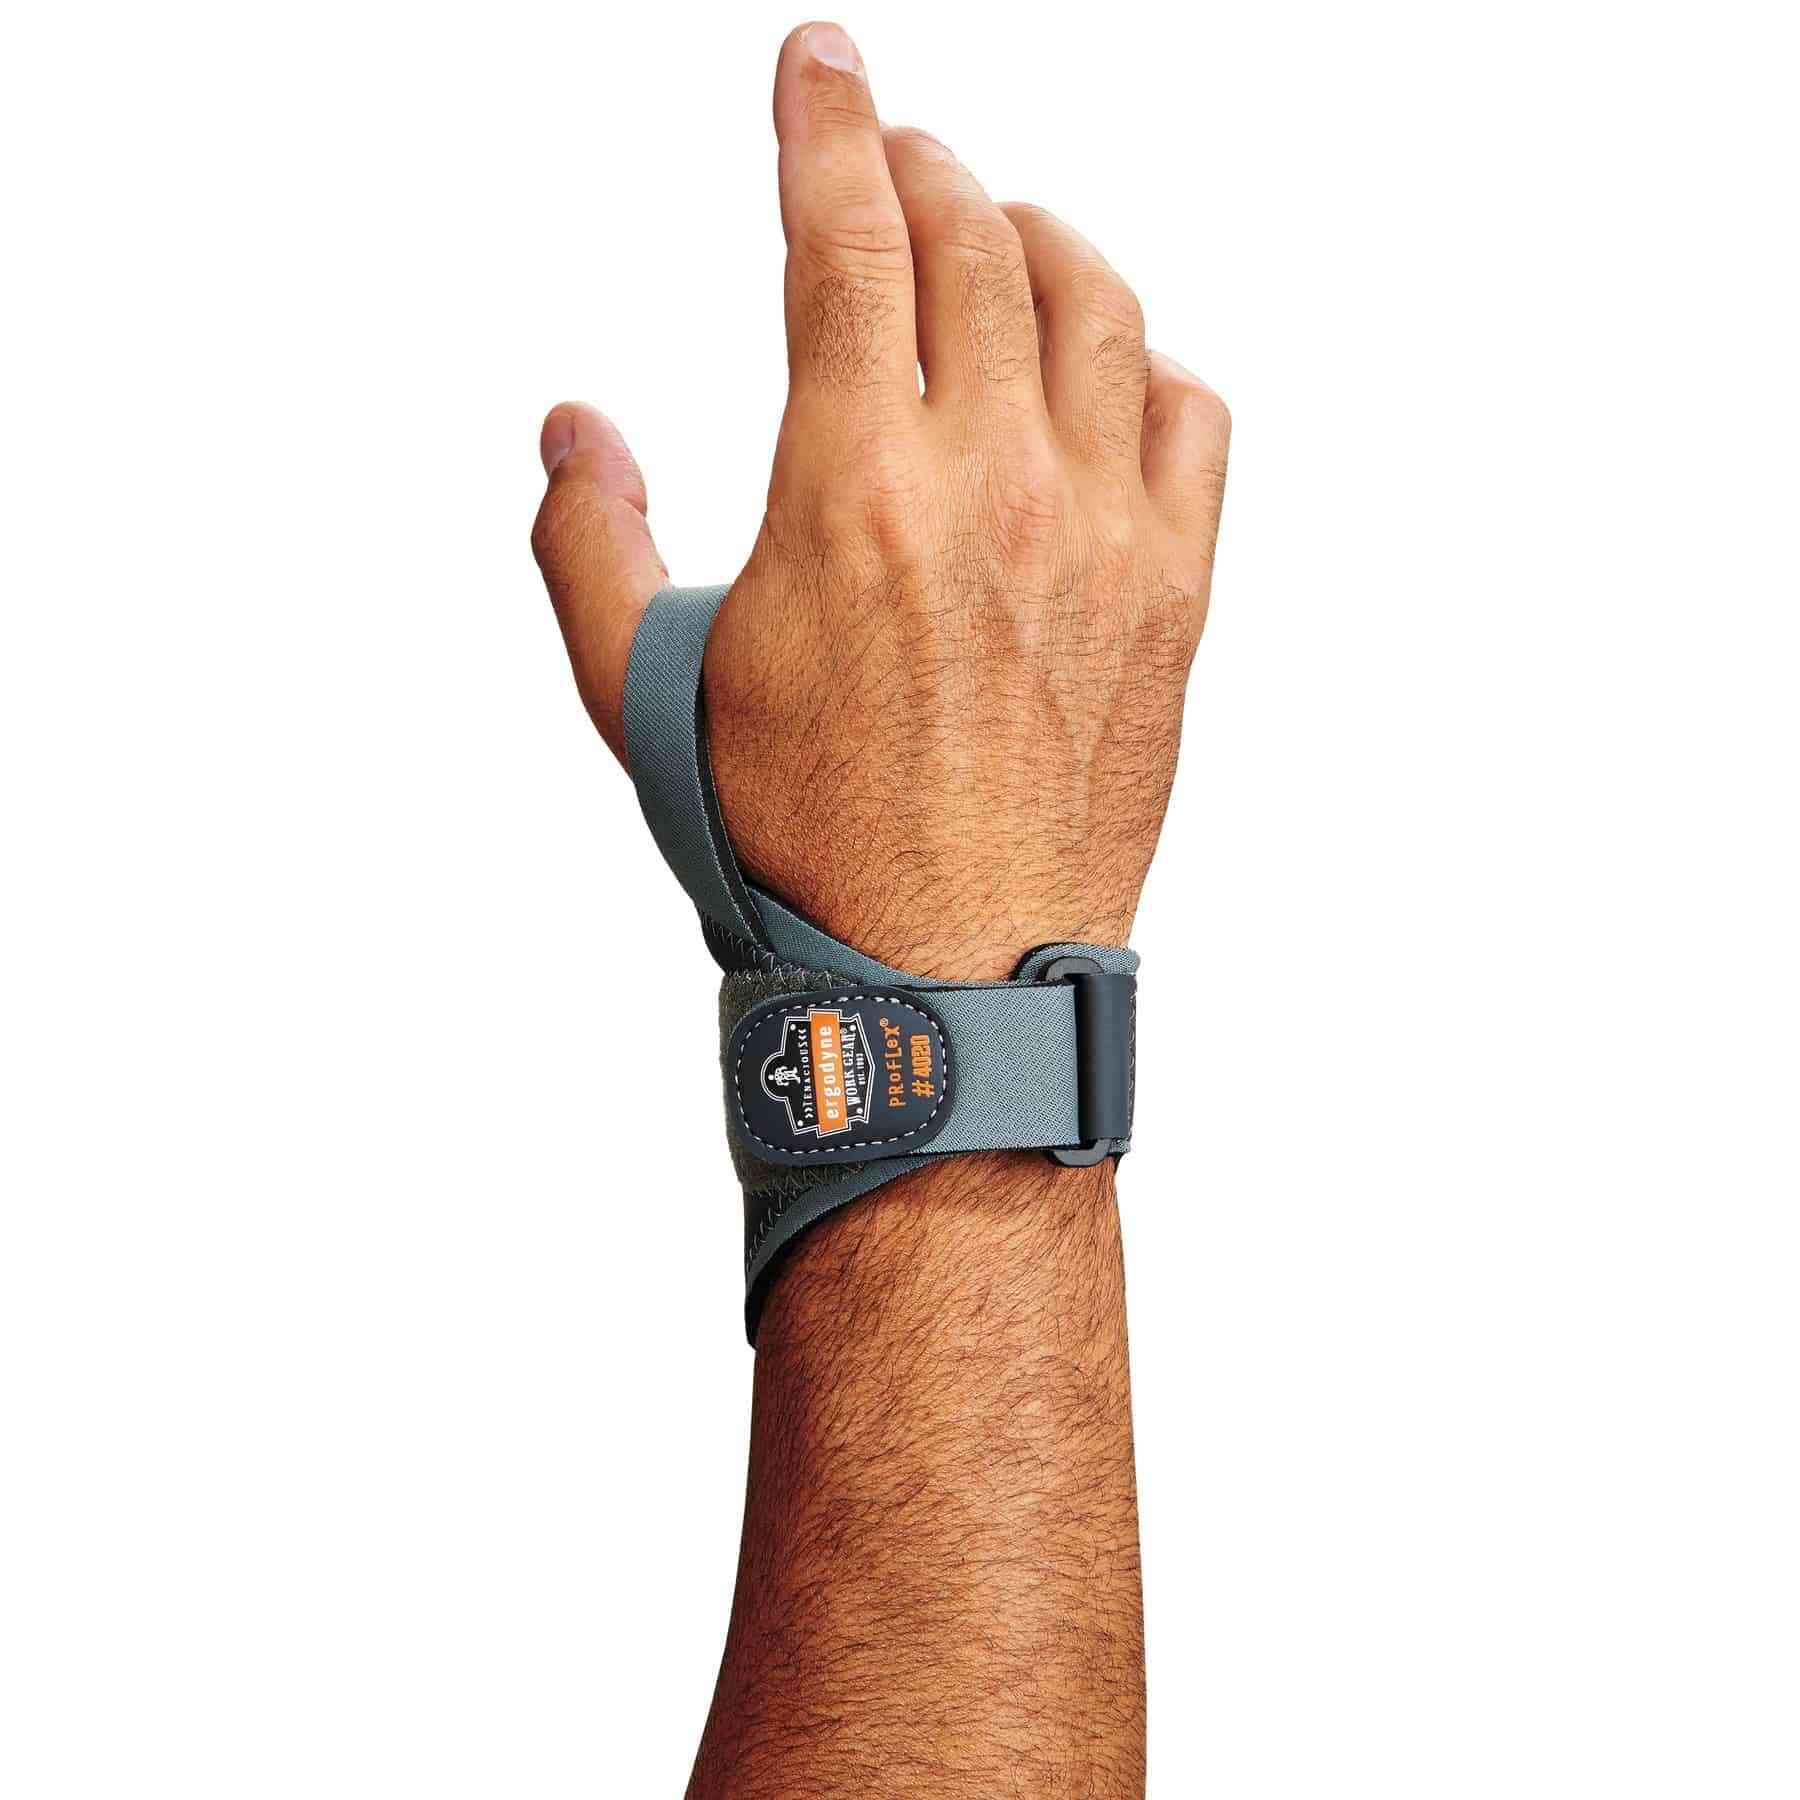 Wrist Support - PRO #770 Cockup Wrist Support